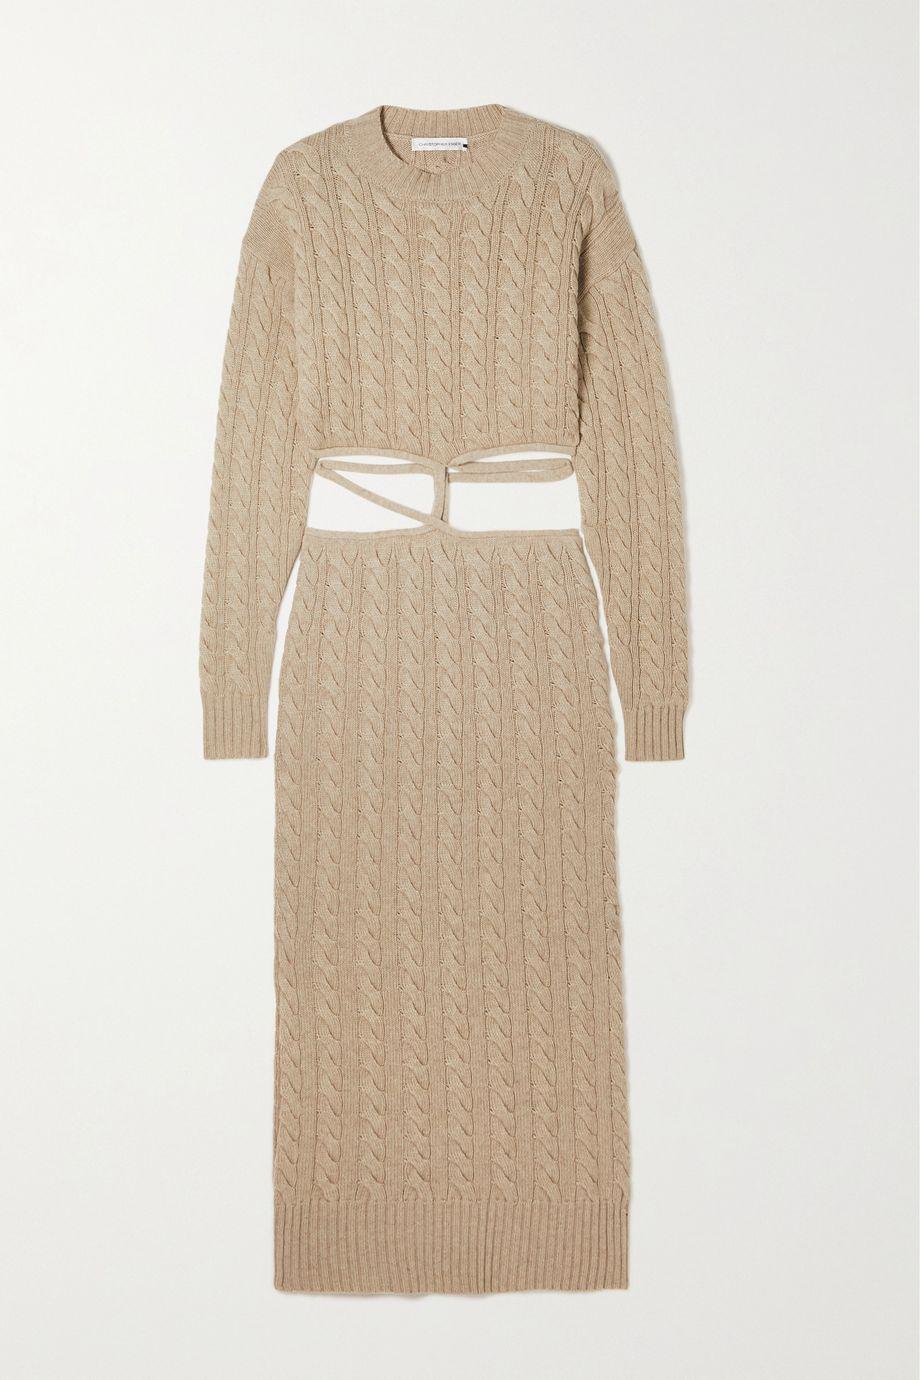 Tie-detailed cutout cable-knit wool and cashmere-blend dress by CHRISTOPHER ESBER